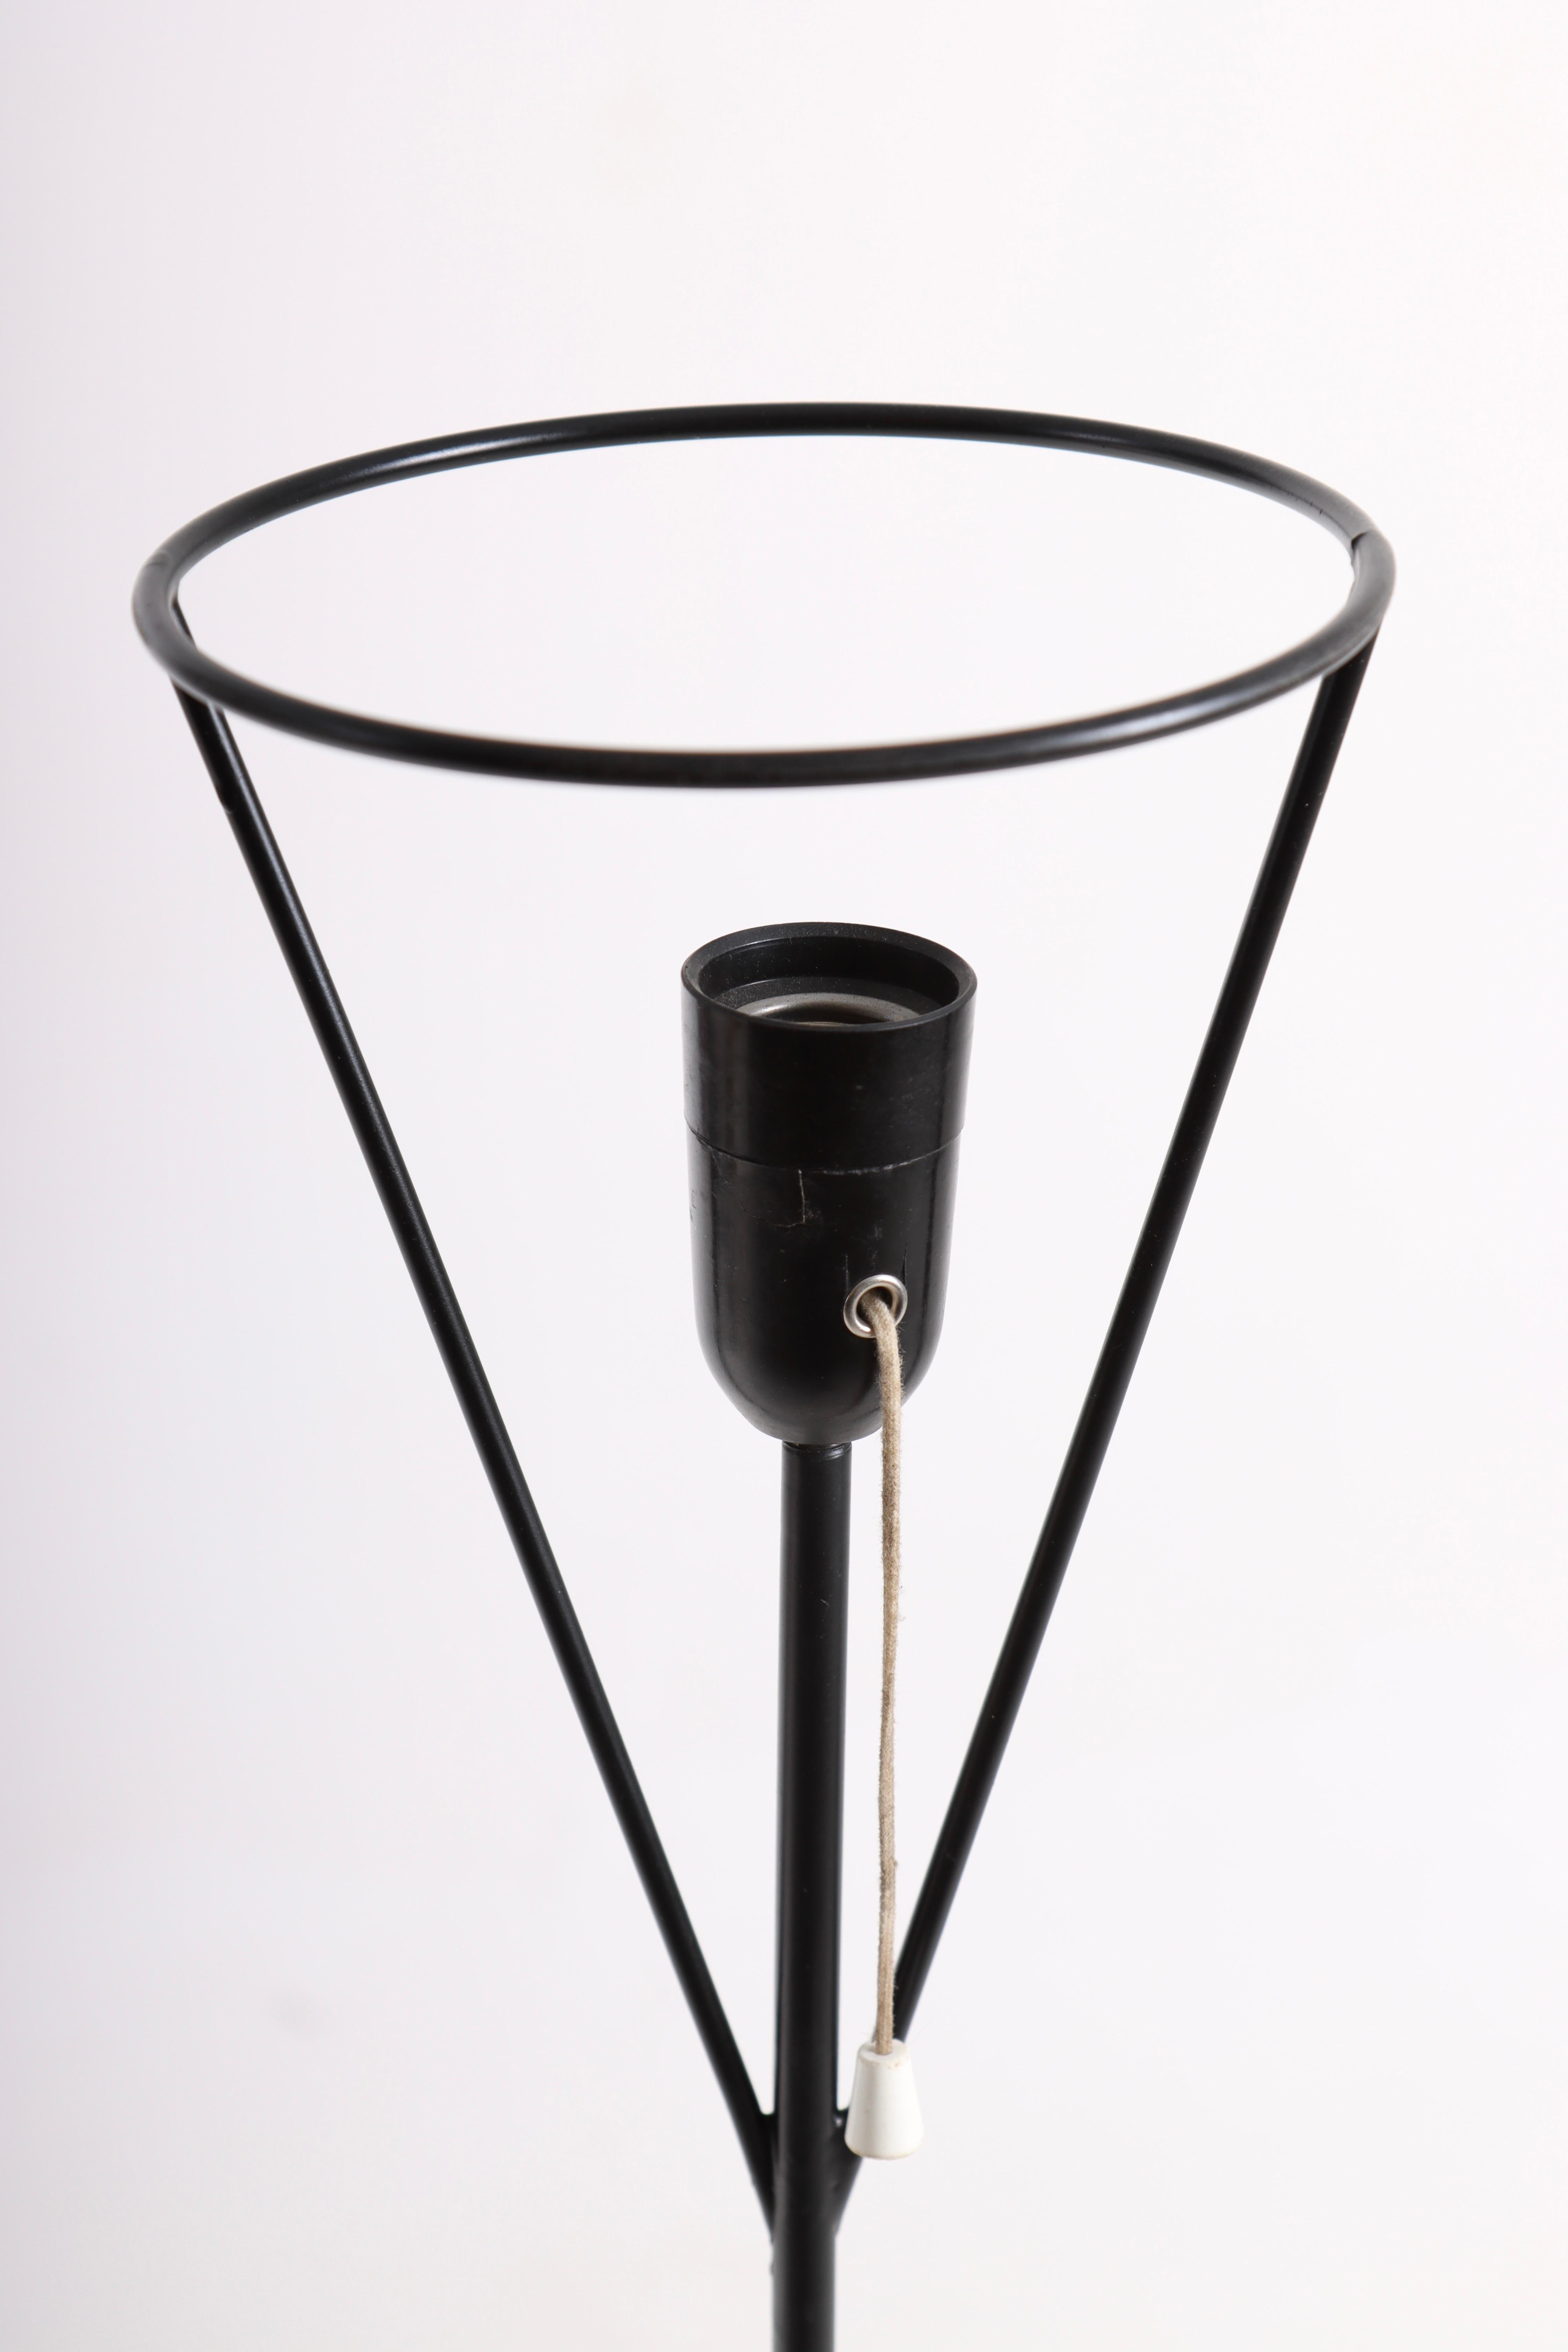 Mid-20th Century Midcentury Visa Versa Floor Lamp by Illums Bolighus from the 1950s For Sale